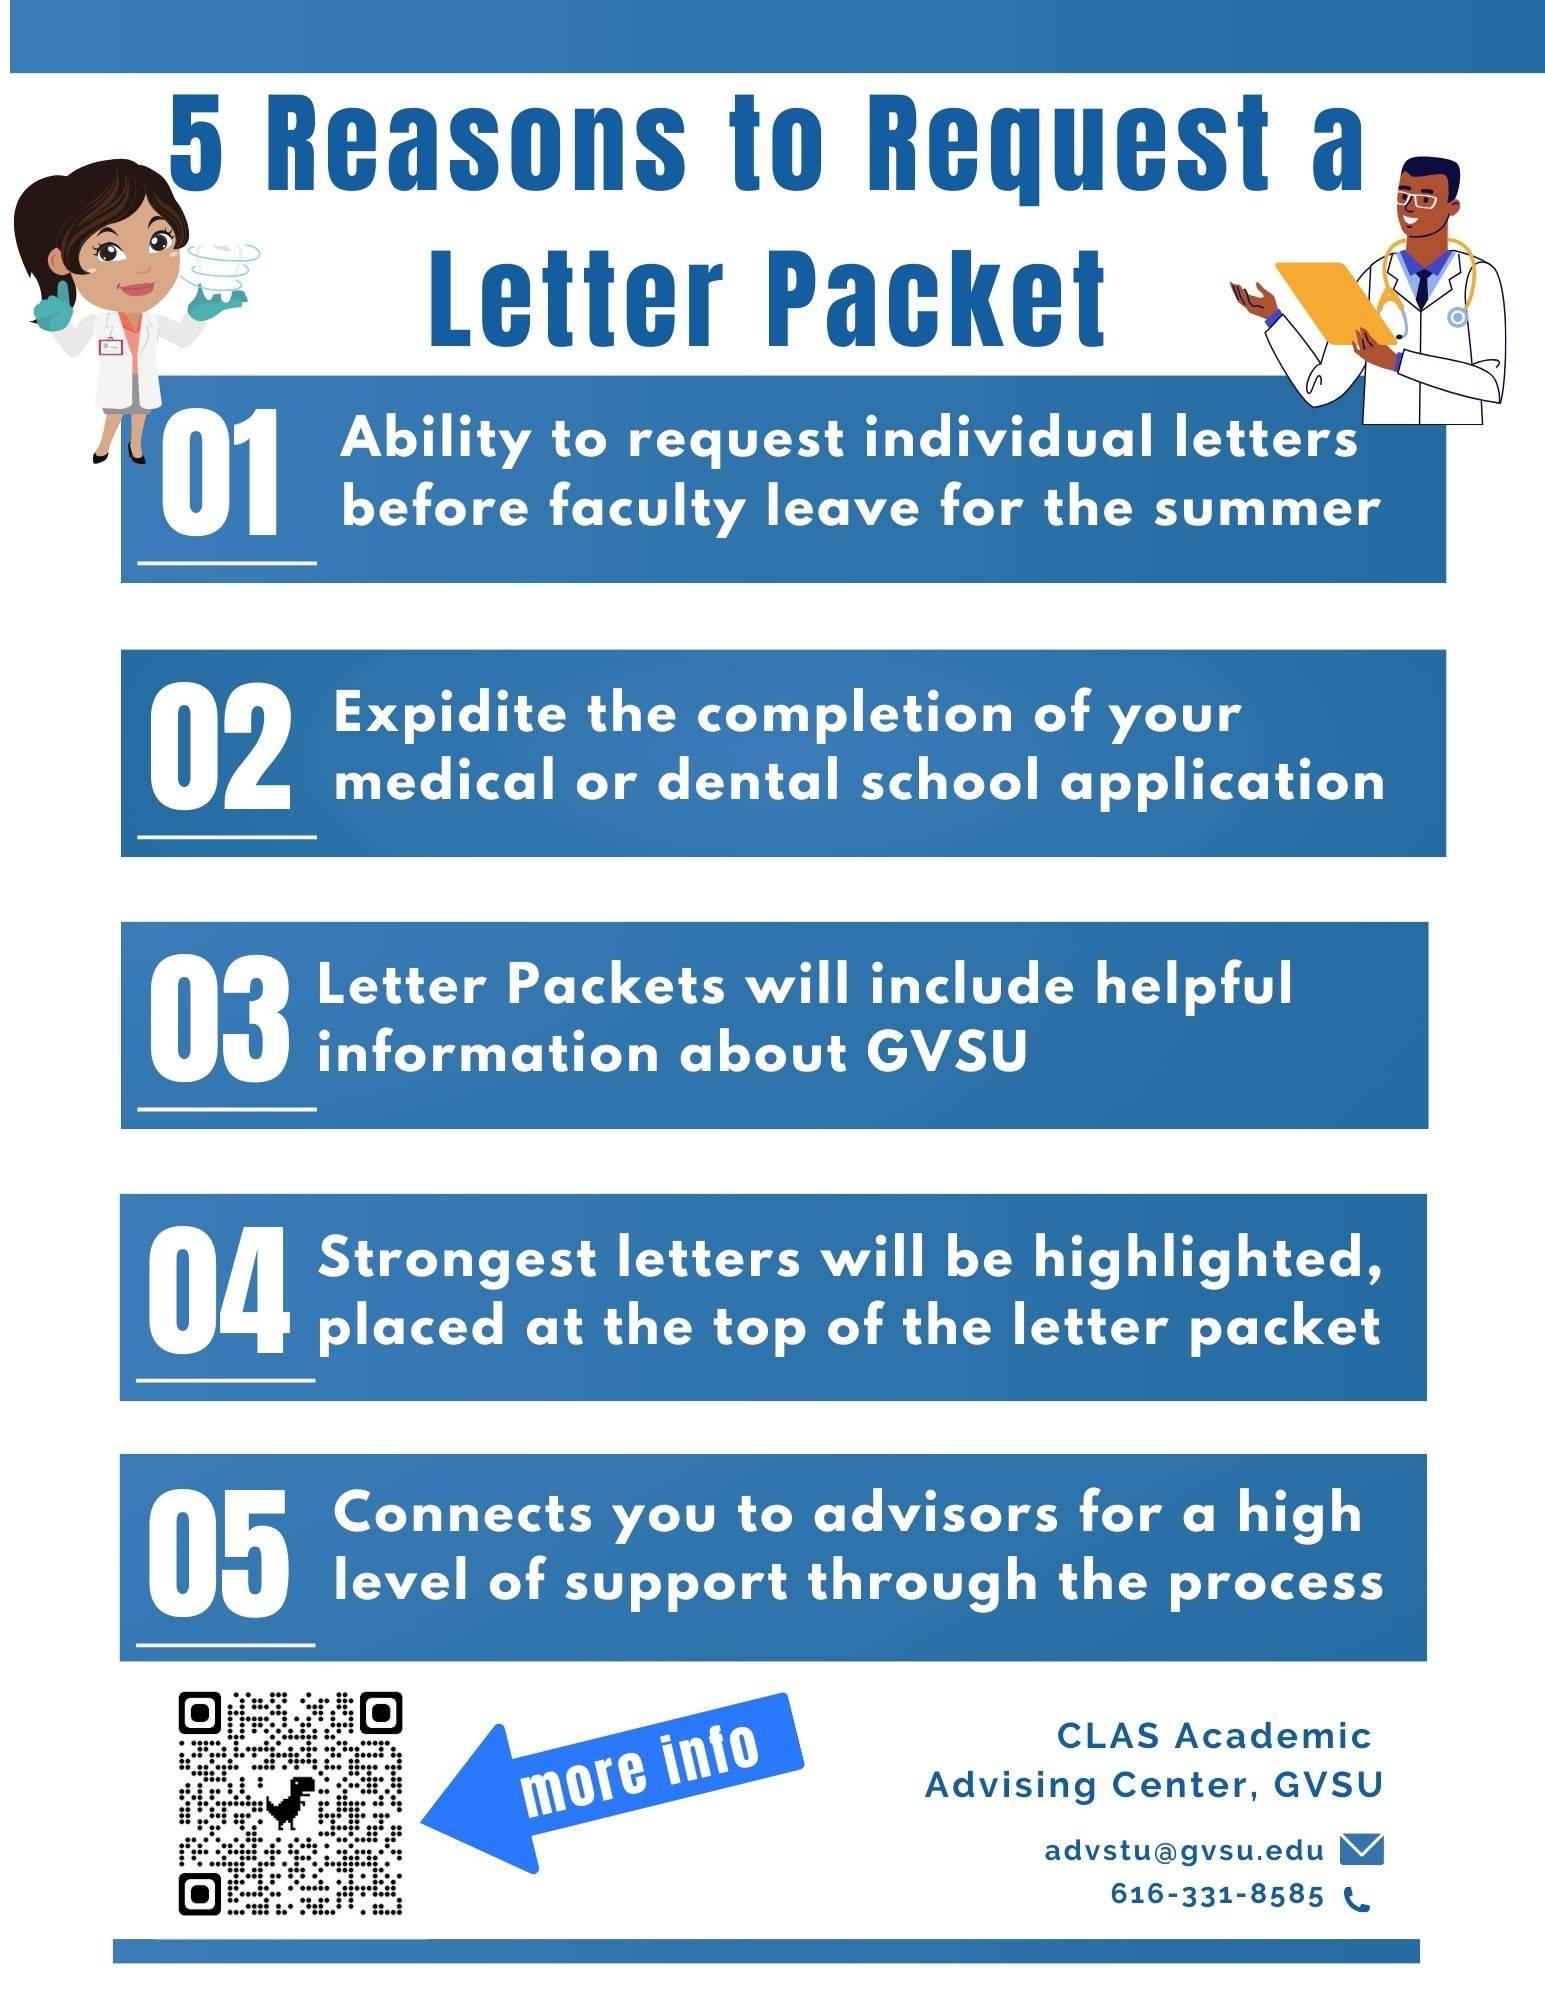 Five reasons to request a letter packet